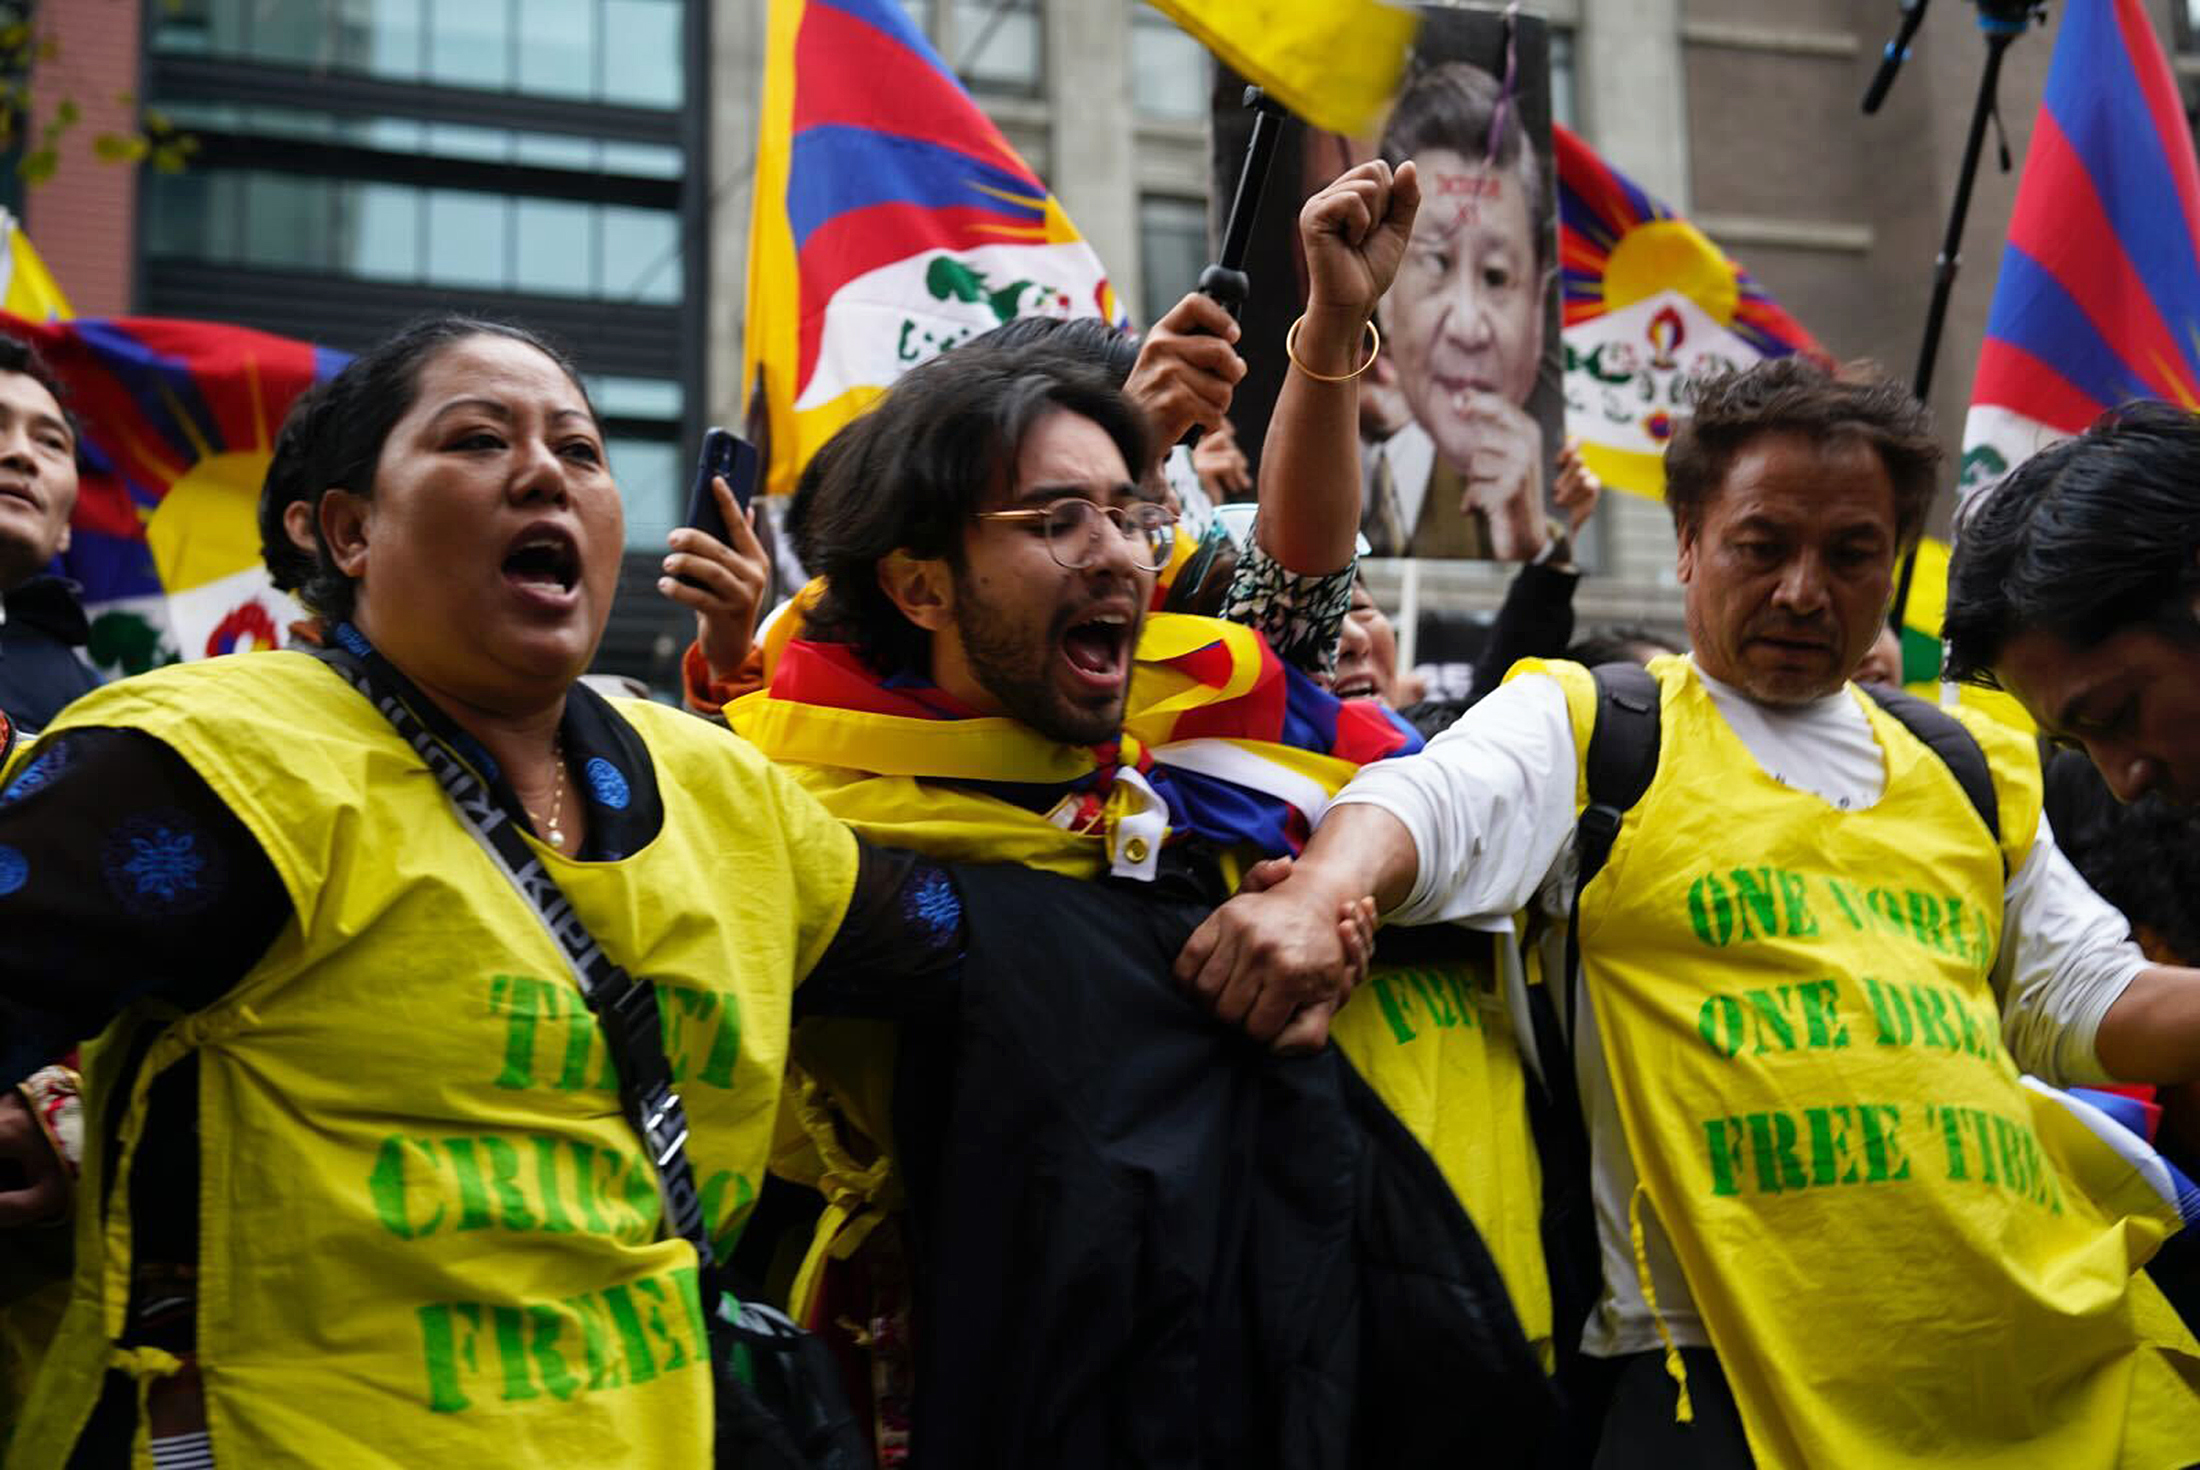 A group of people link arms during a protest with Tibetan flags in the background.